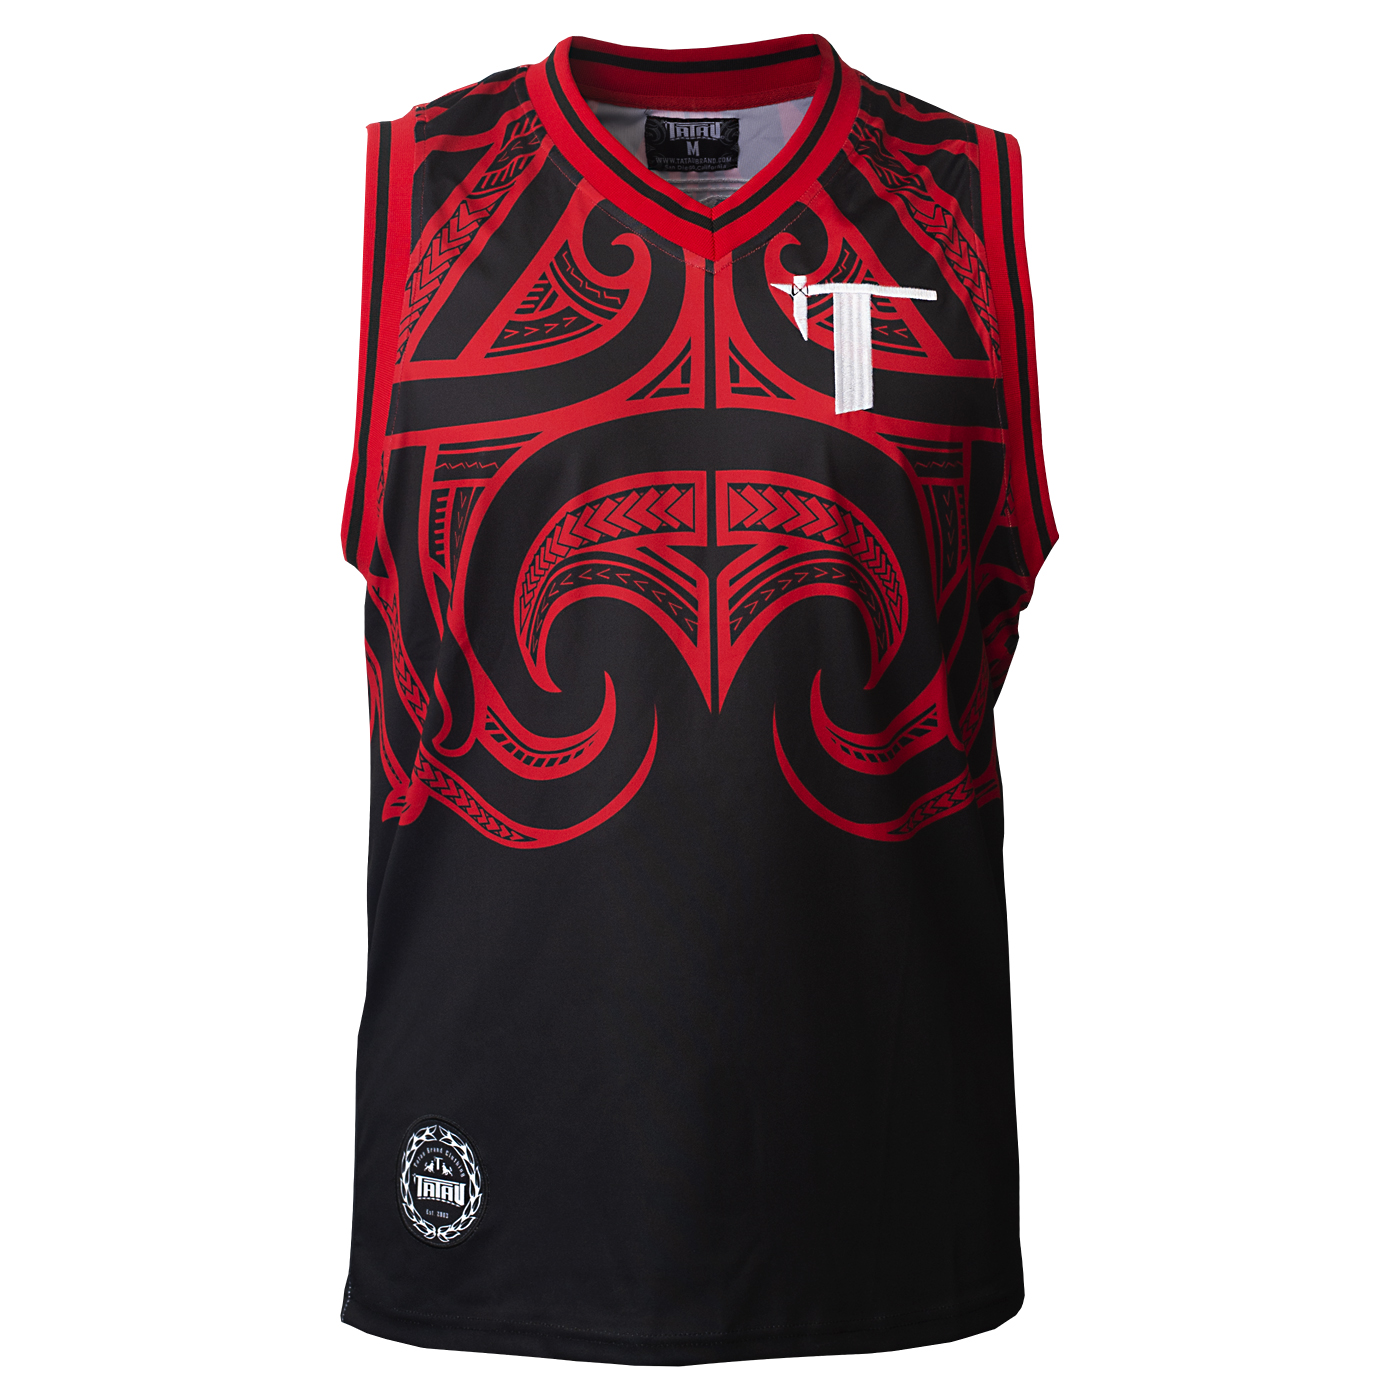 red and black jersey